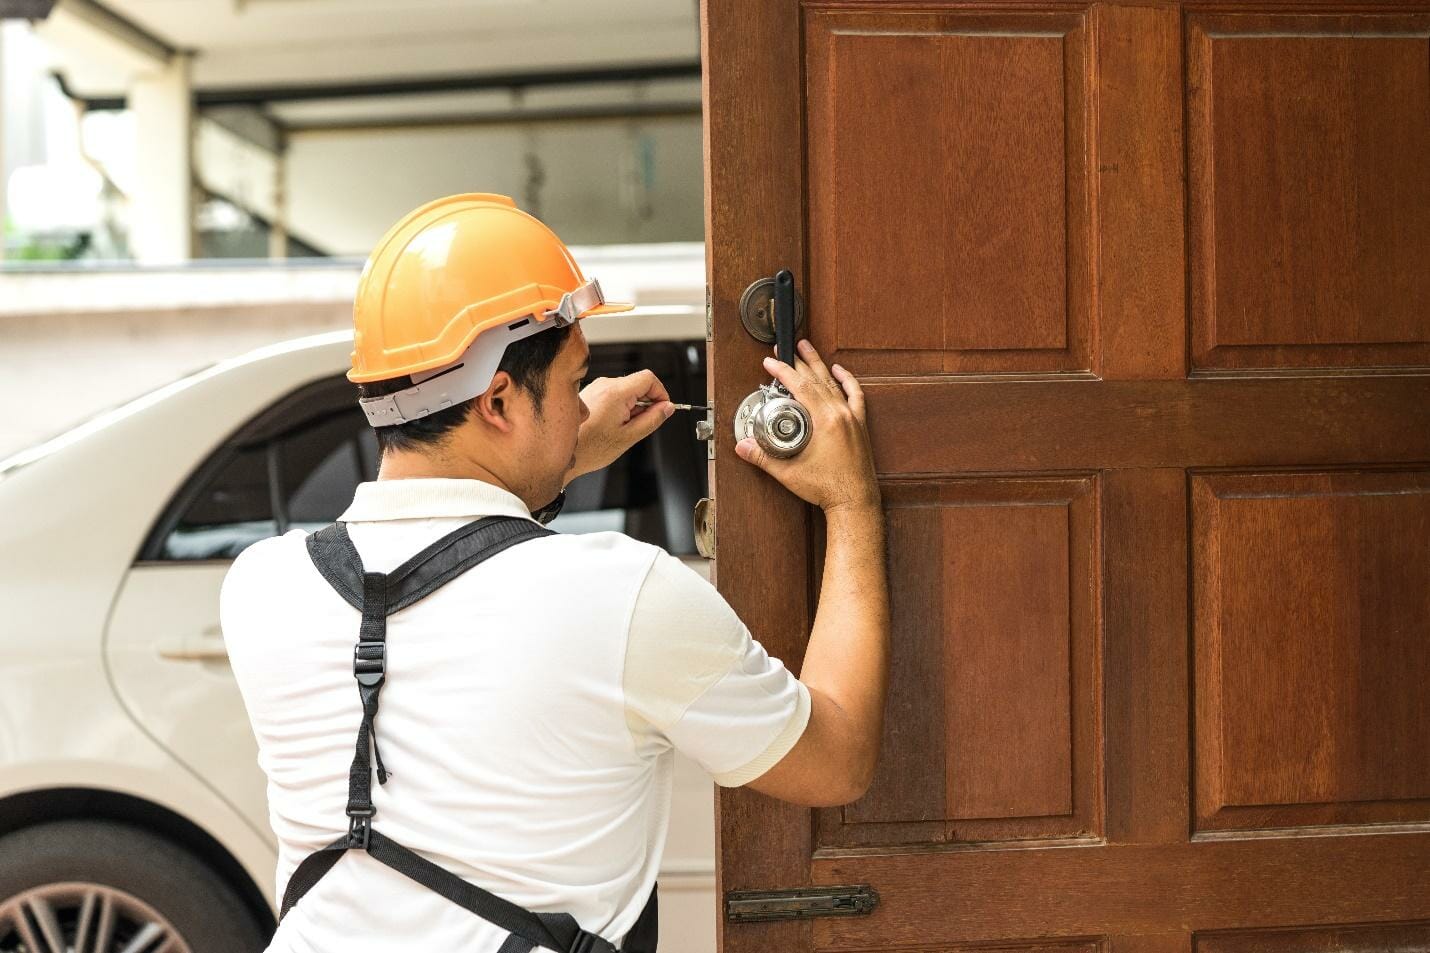 How to open a locked interior door when you’ve lost the key